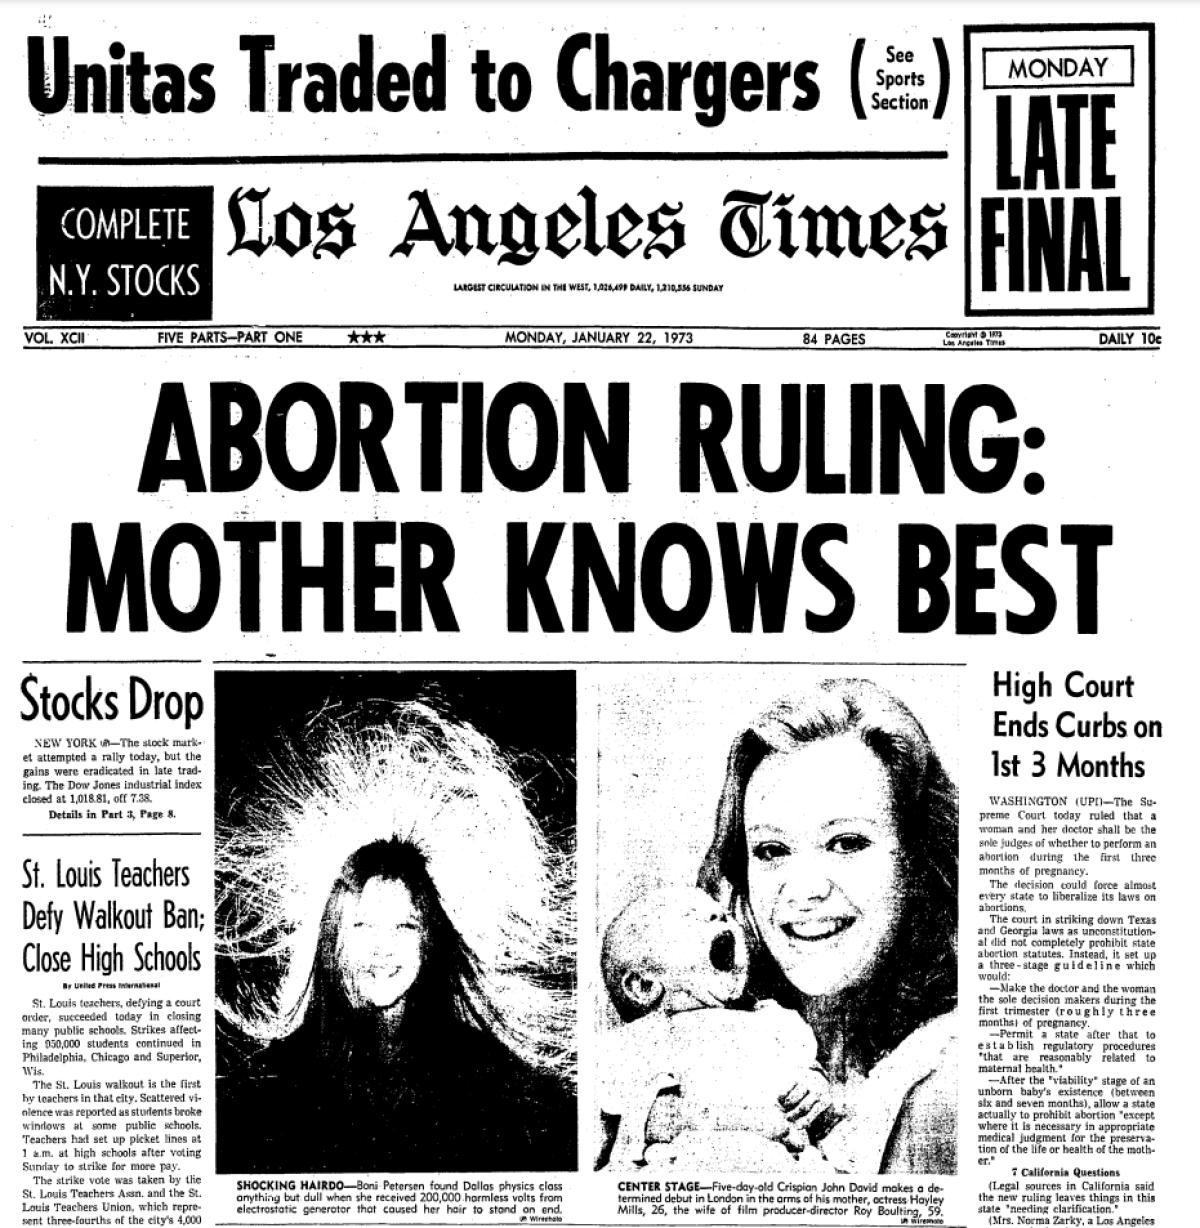 Front page of LA Times with headline: "Abortion Ruling: Mother Knows Best: